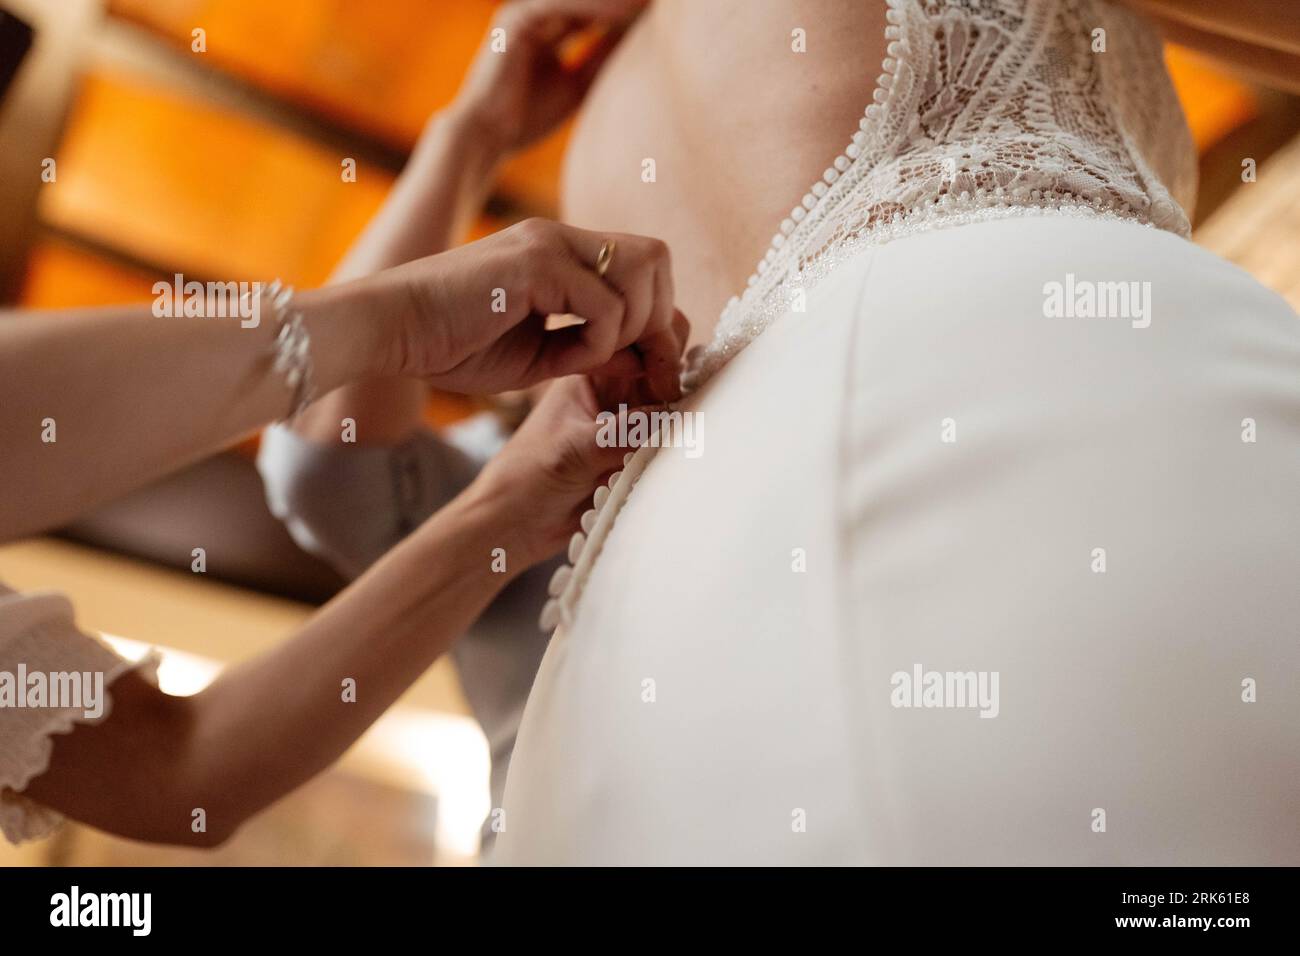 A young woman wearing a white bridal gown with intricate details Stock Photo